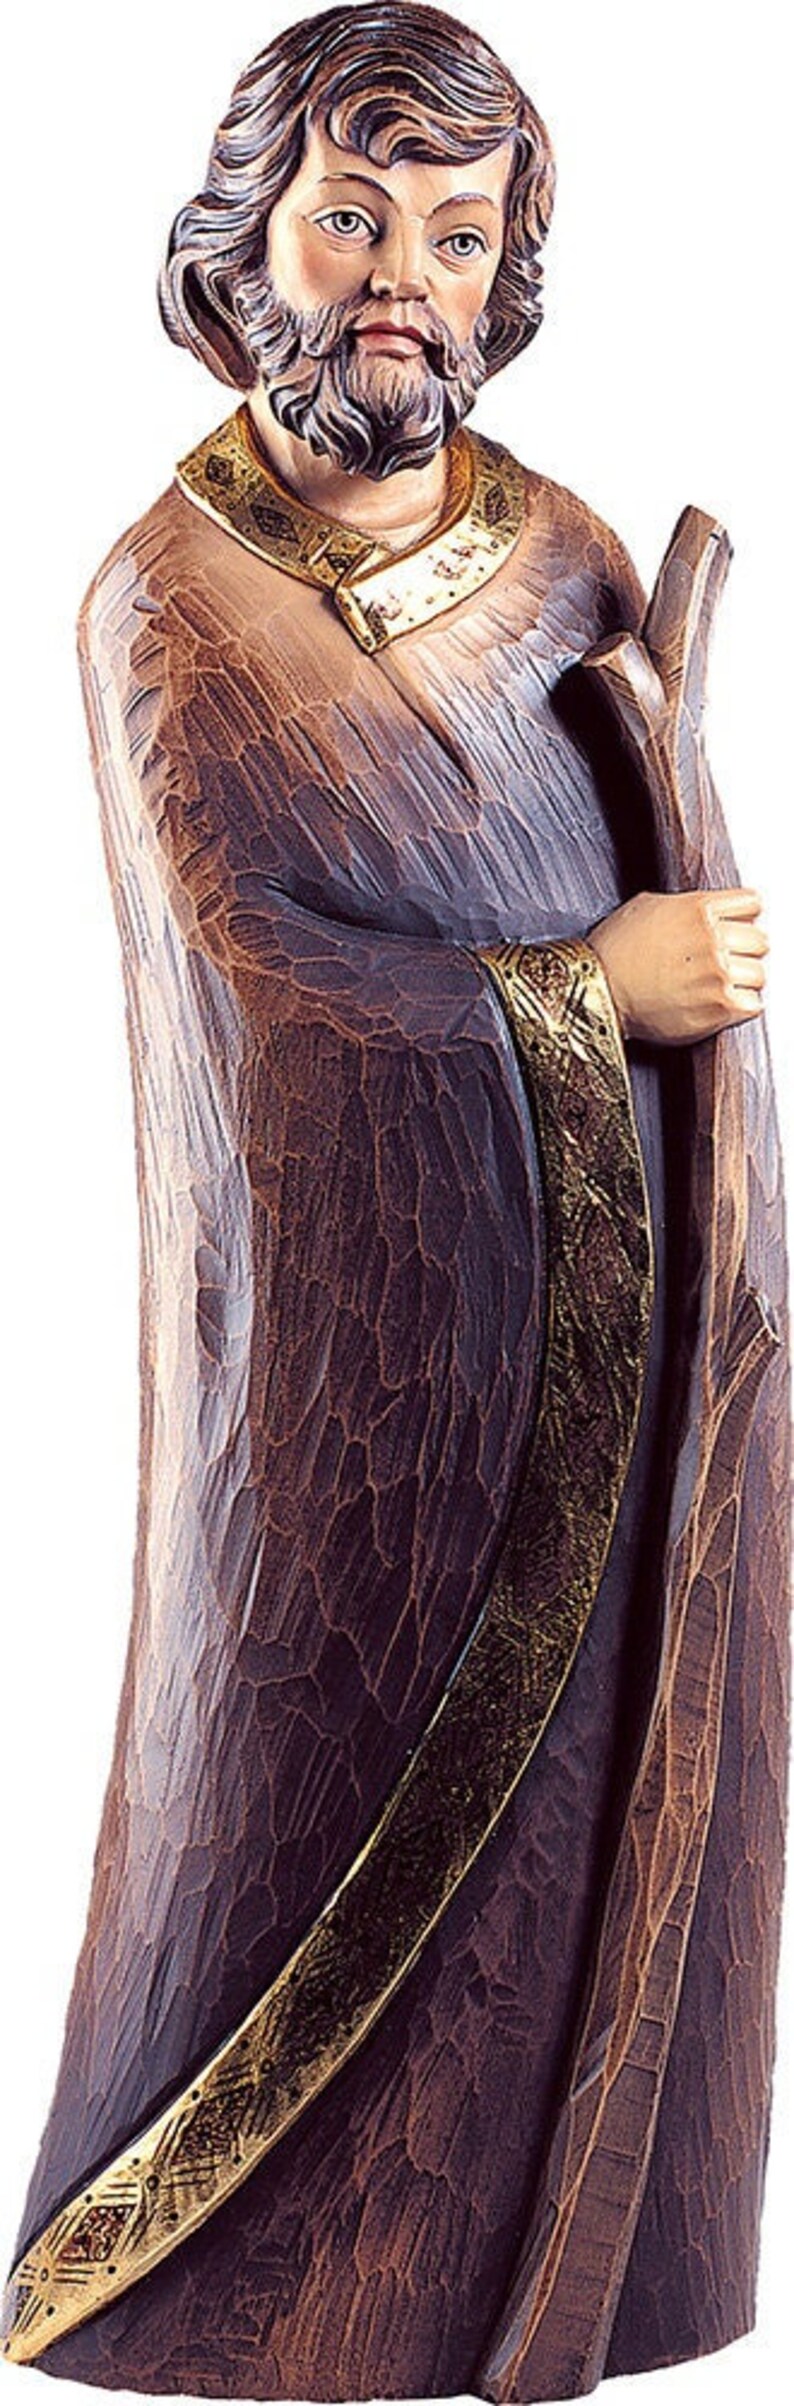 Statue of St. Joseph carved in wood from Valgardena and decorated by hand of Italian artisan production image 1